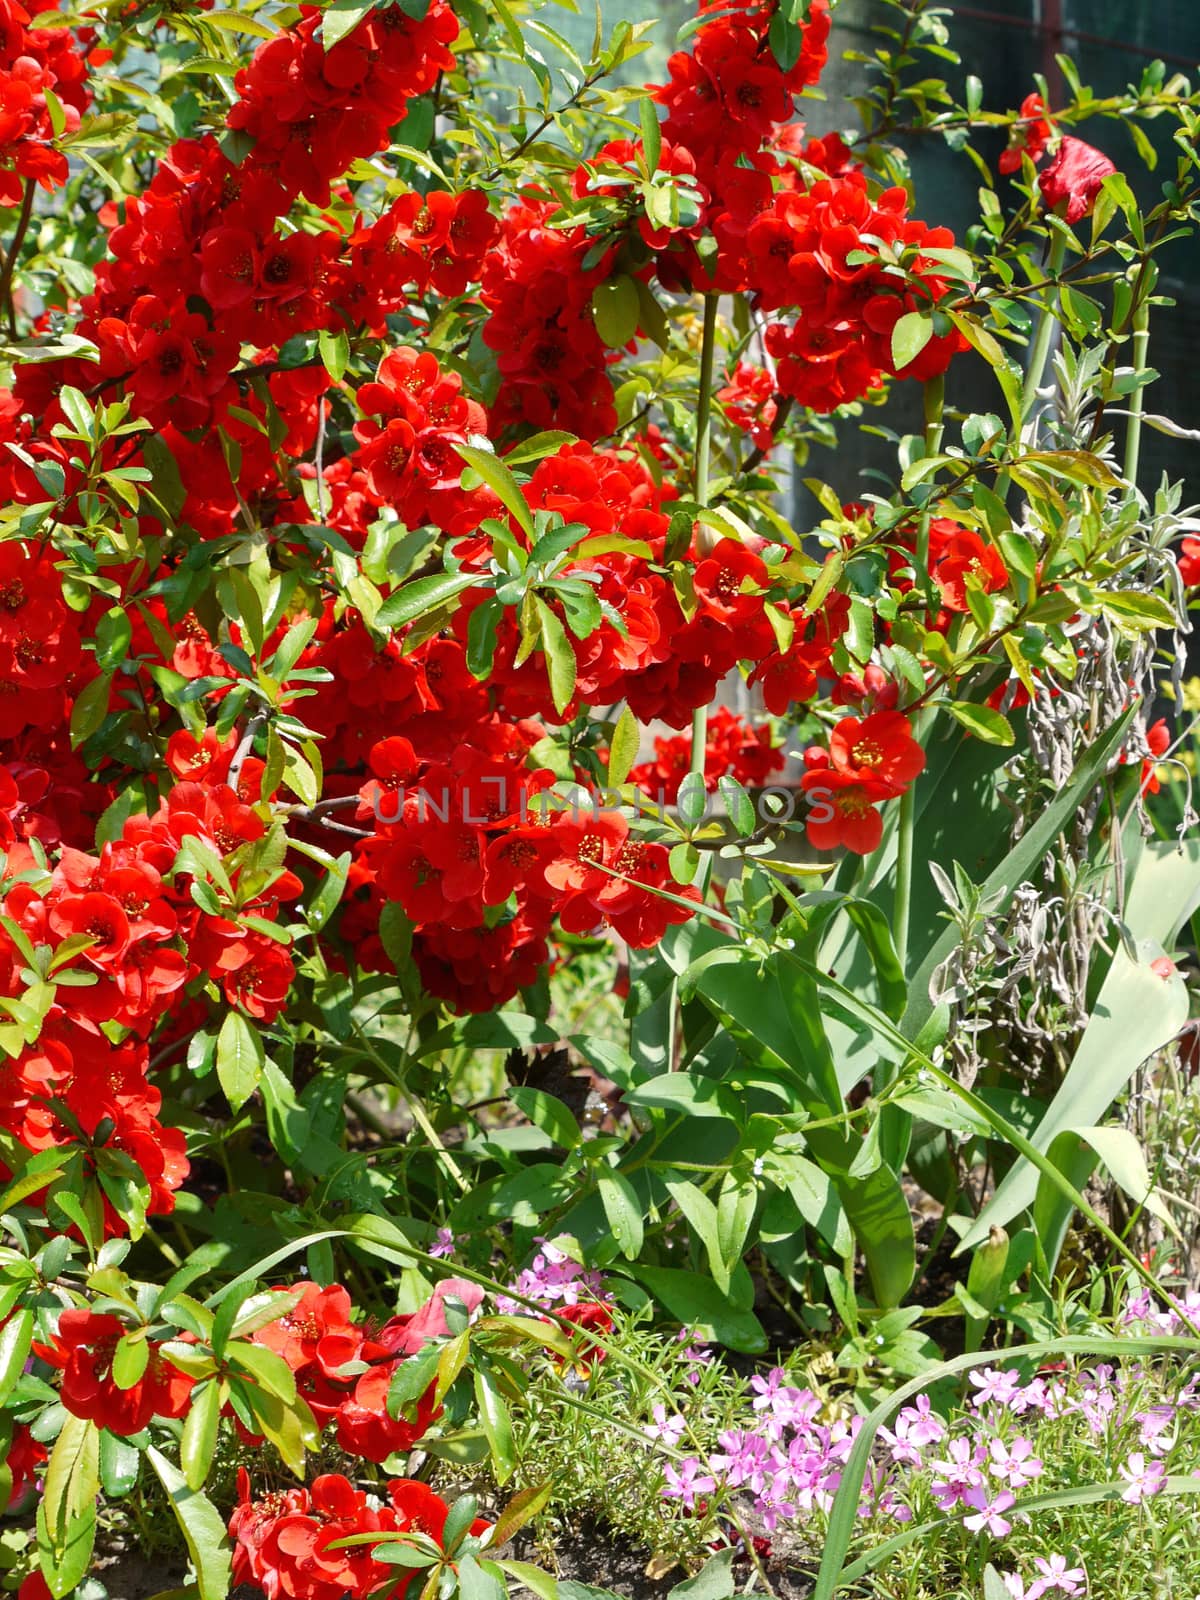 A beautiful bush of flowers with red petals densely growing with green leaves under the rays of a warm summer sun.